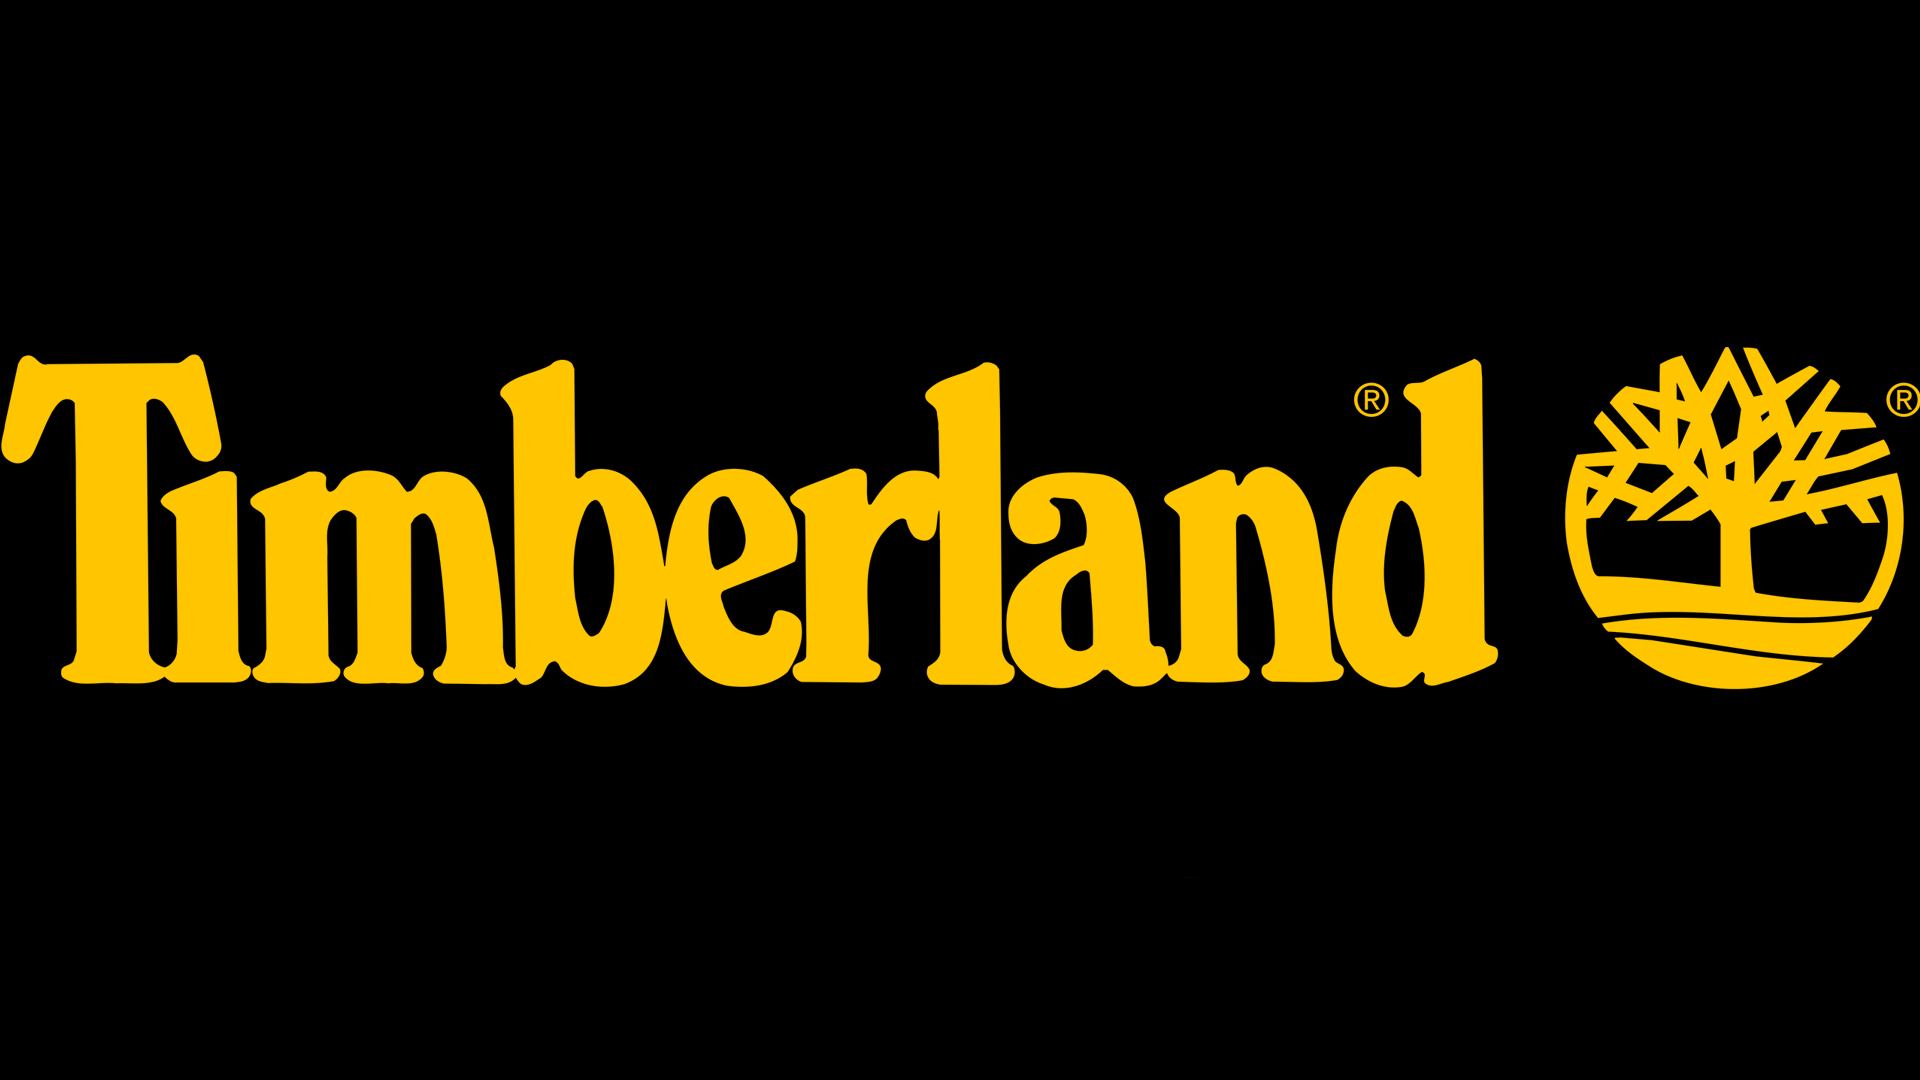 Meaning Timberland logo and symbol.